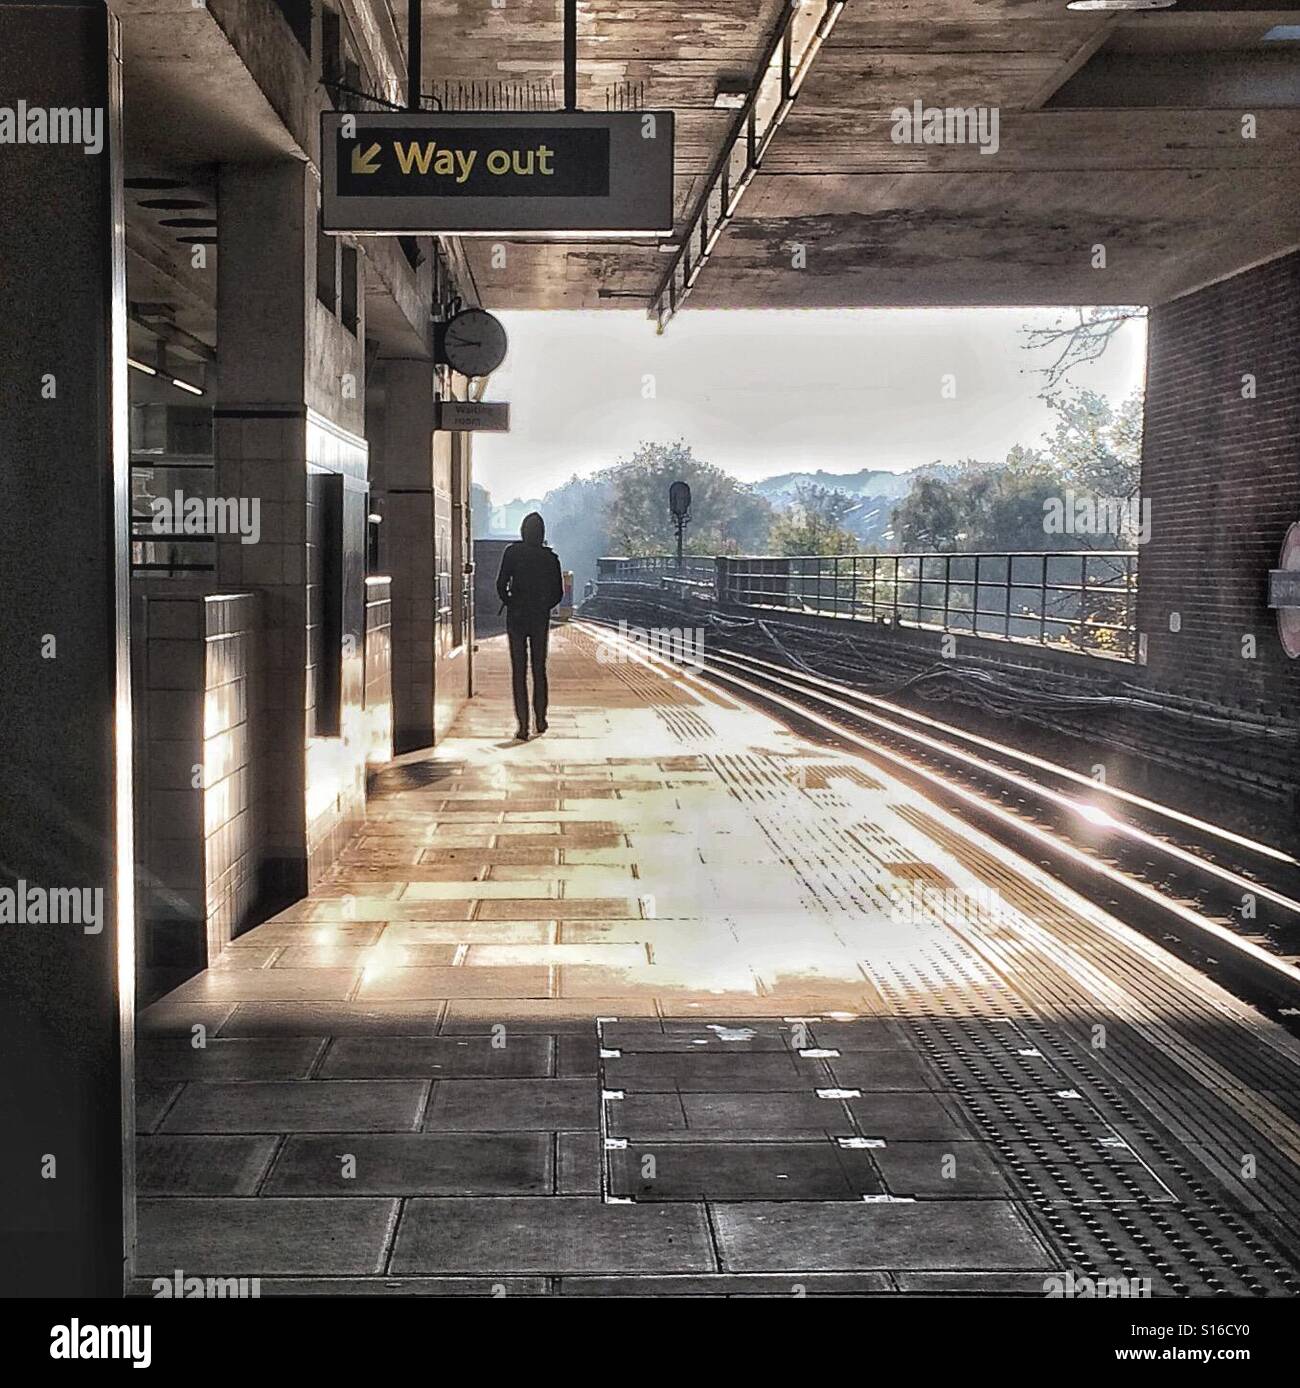 Lone figure on railway platform, beneath a Way Out sign. Stock Photo